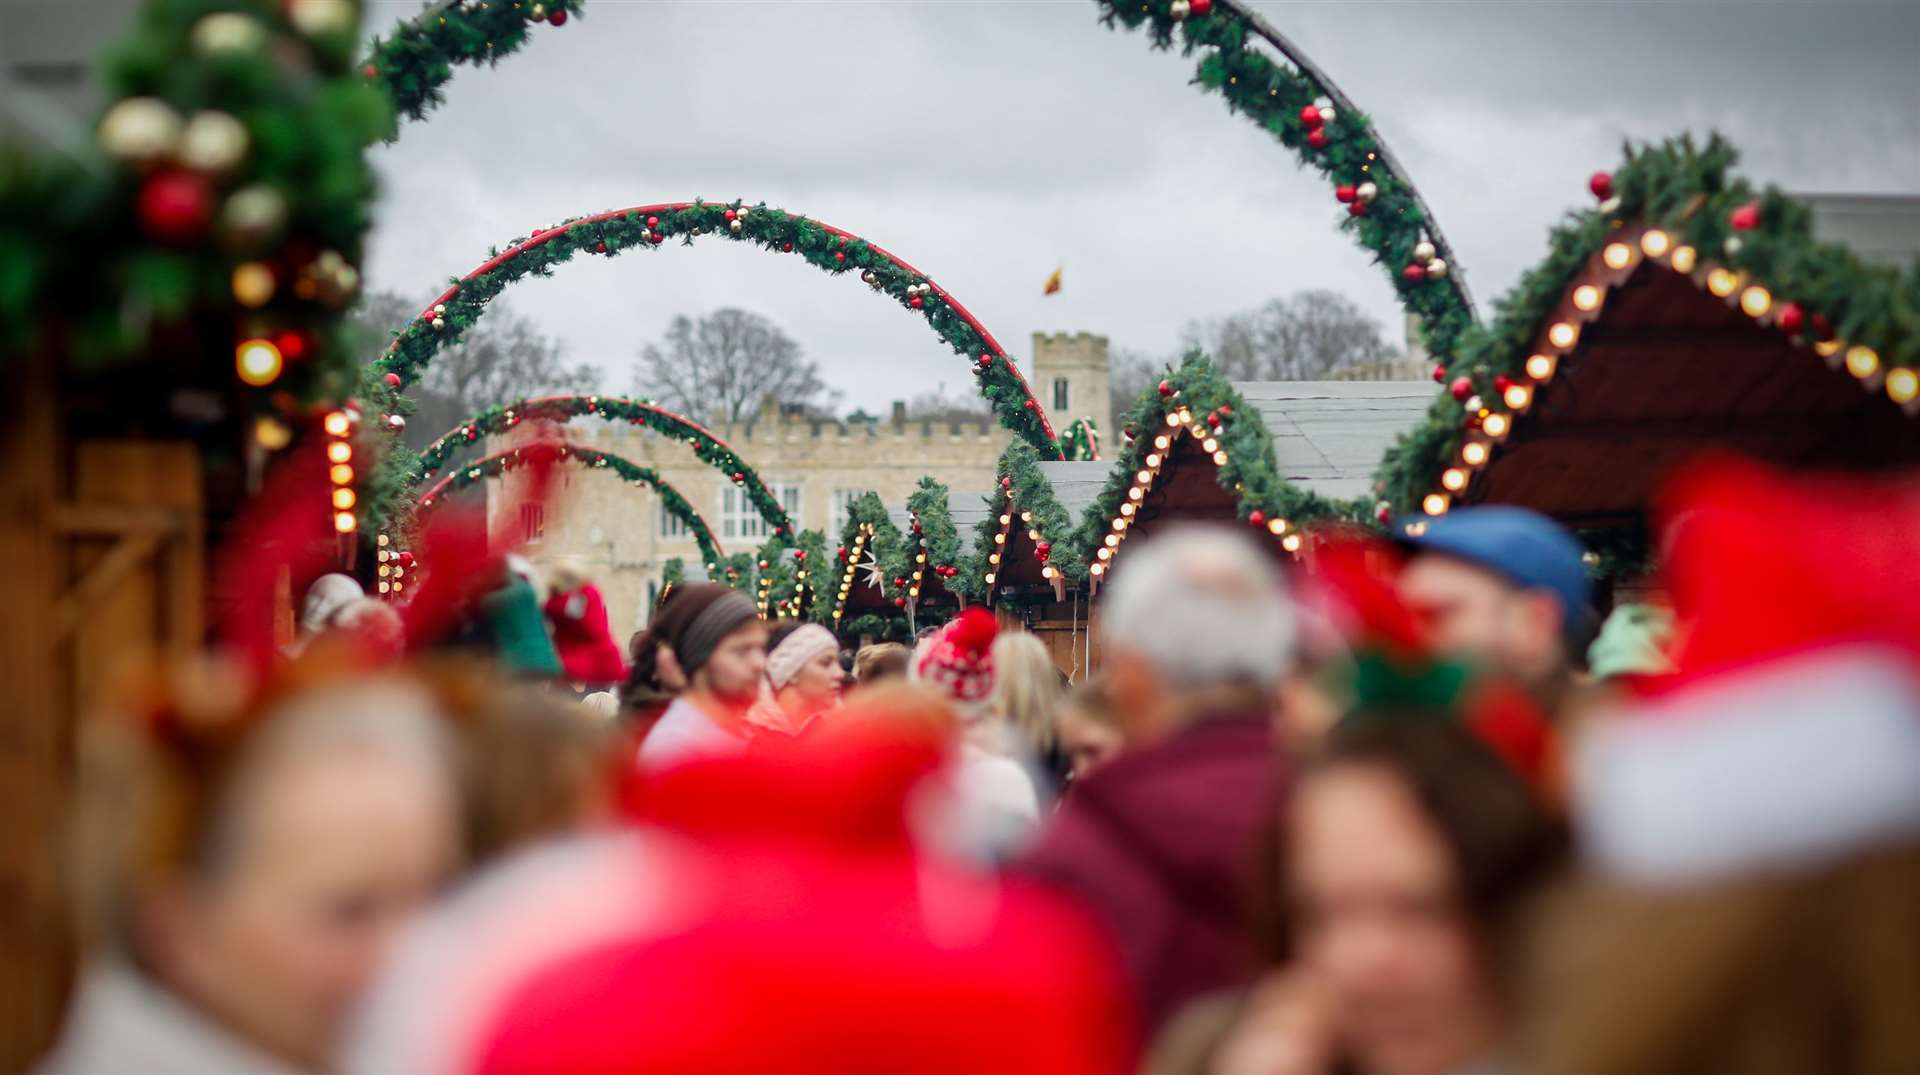 Families will be able to let their Christmas wishes take flight at Leeds Castle this Christmas as they enter into a magical kingdom of birds and festive feathers! Picture by: www.matthewwalkerphotography.com